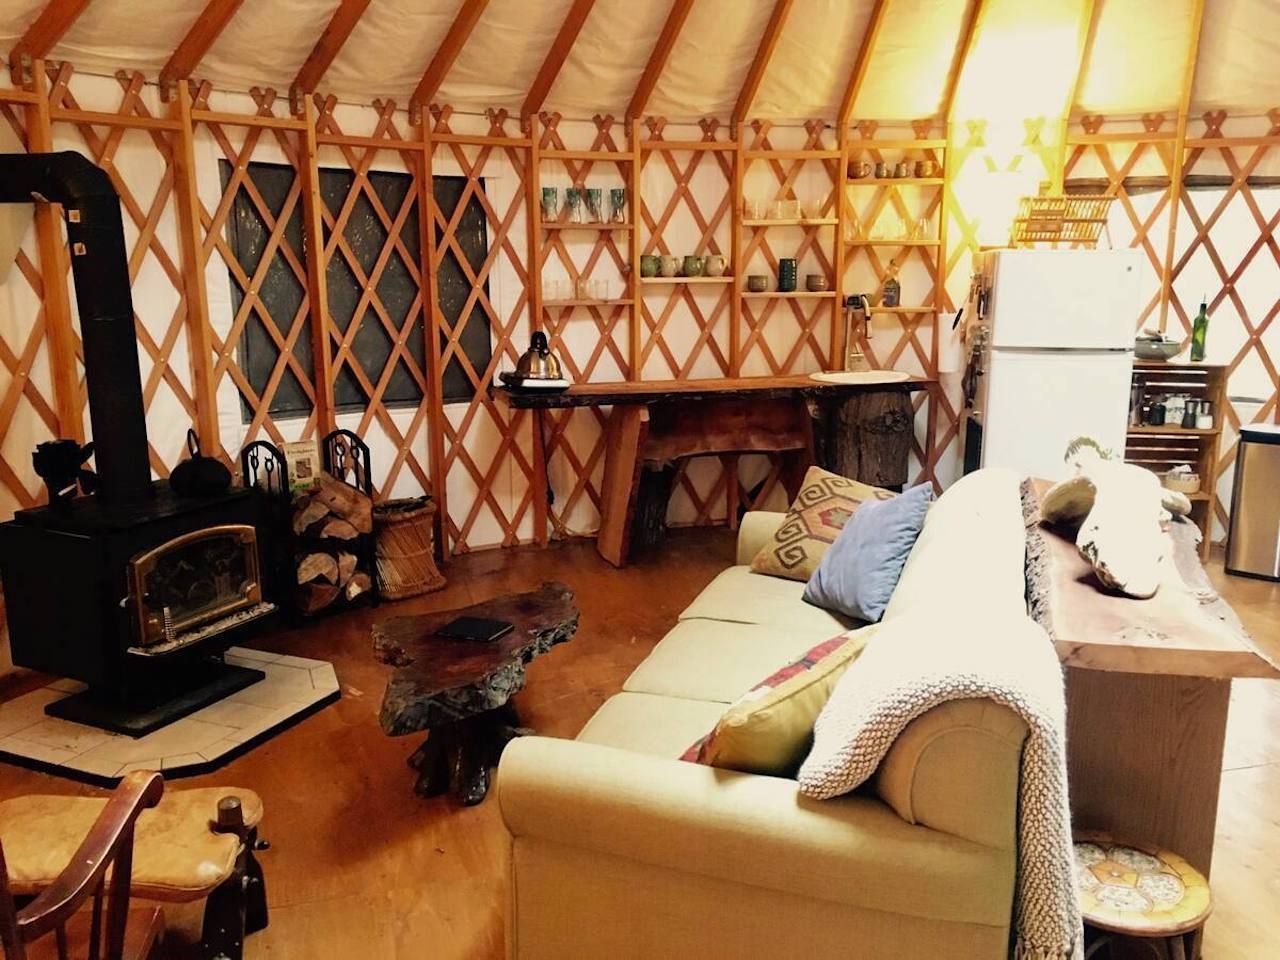 The cozy interior of a modern yurt with a couch, fridge, and wood stove